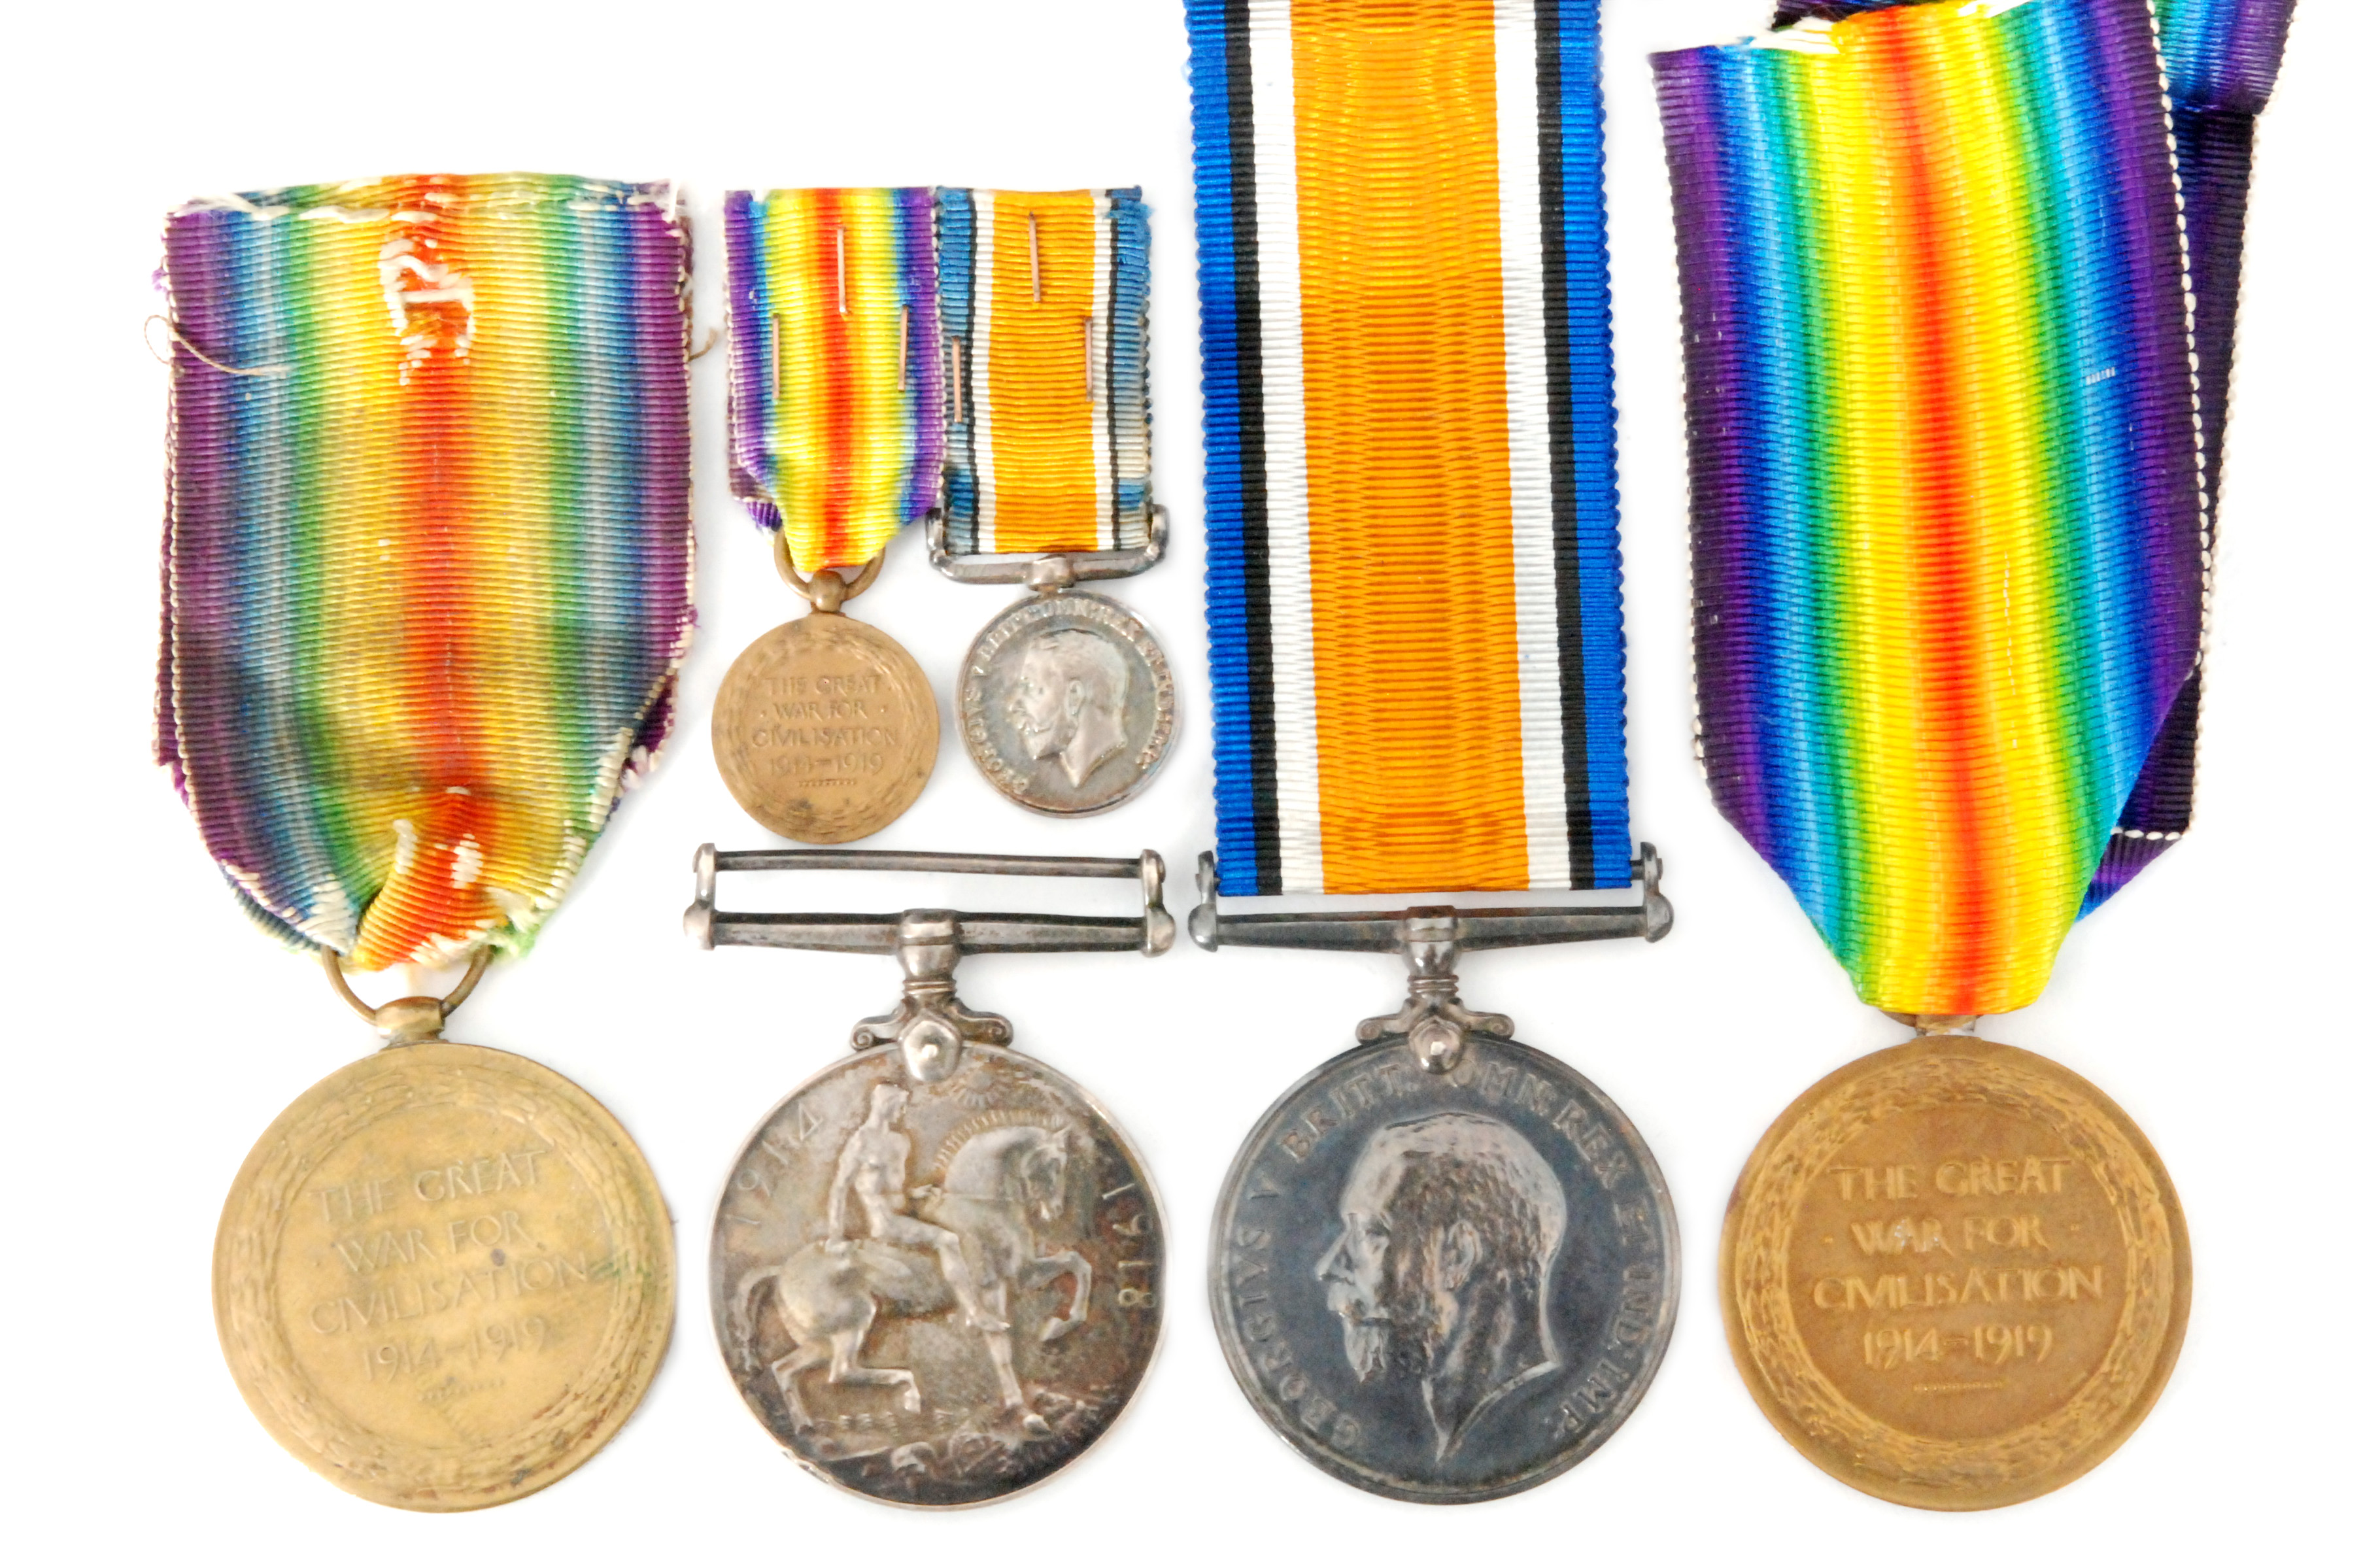 Two First World War medal pairs (British War & Victory) to 392 Gnr N Thomson A 1 Battery (worn) and